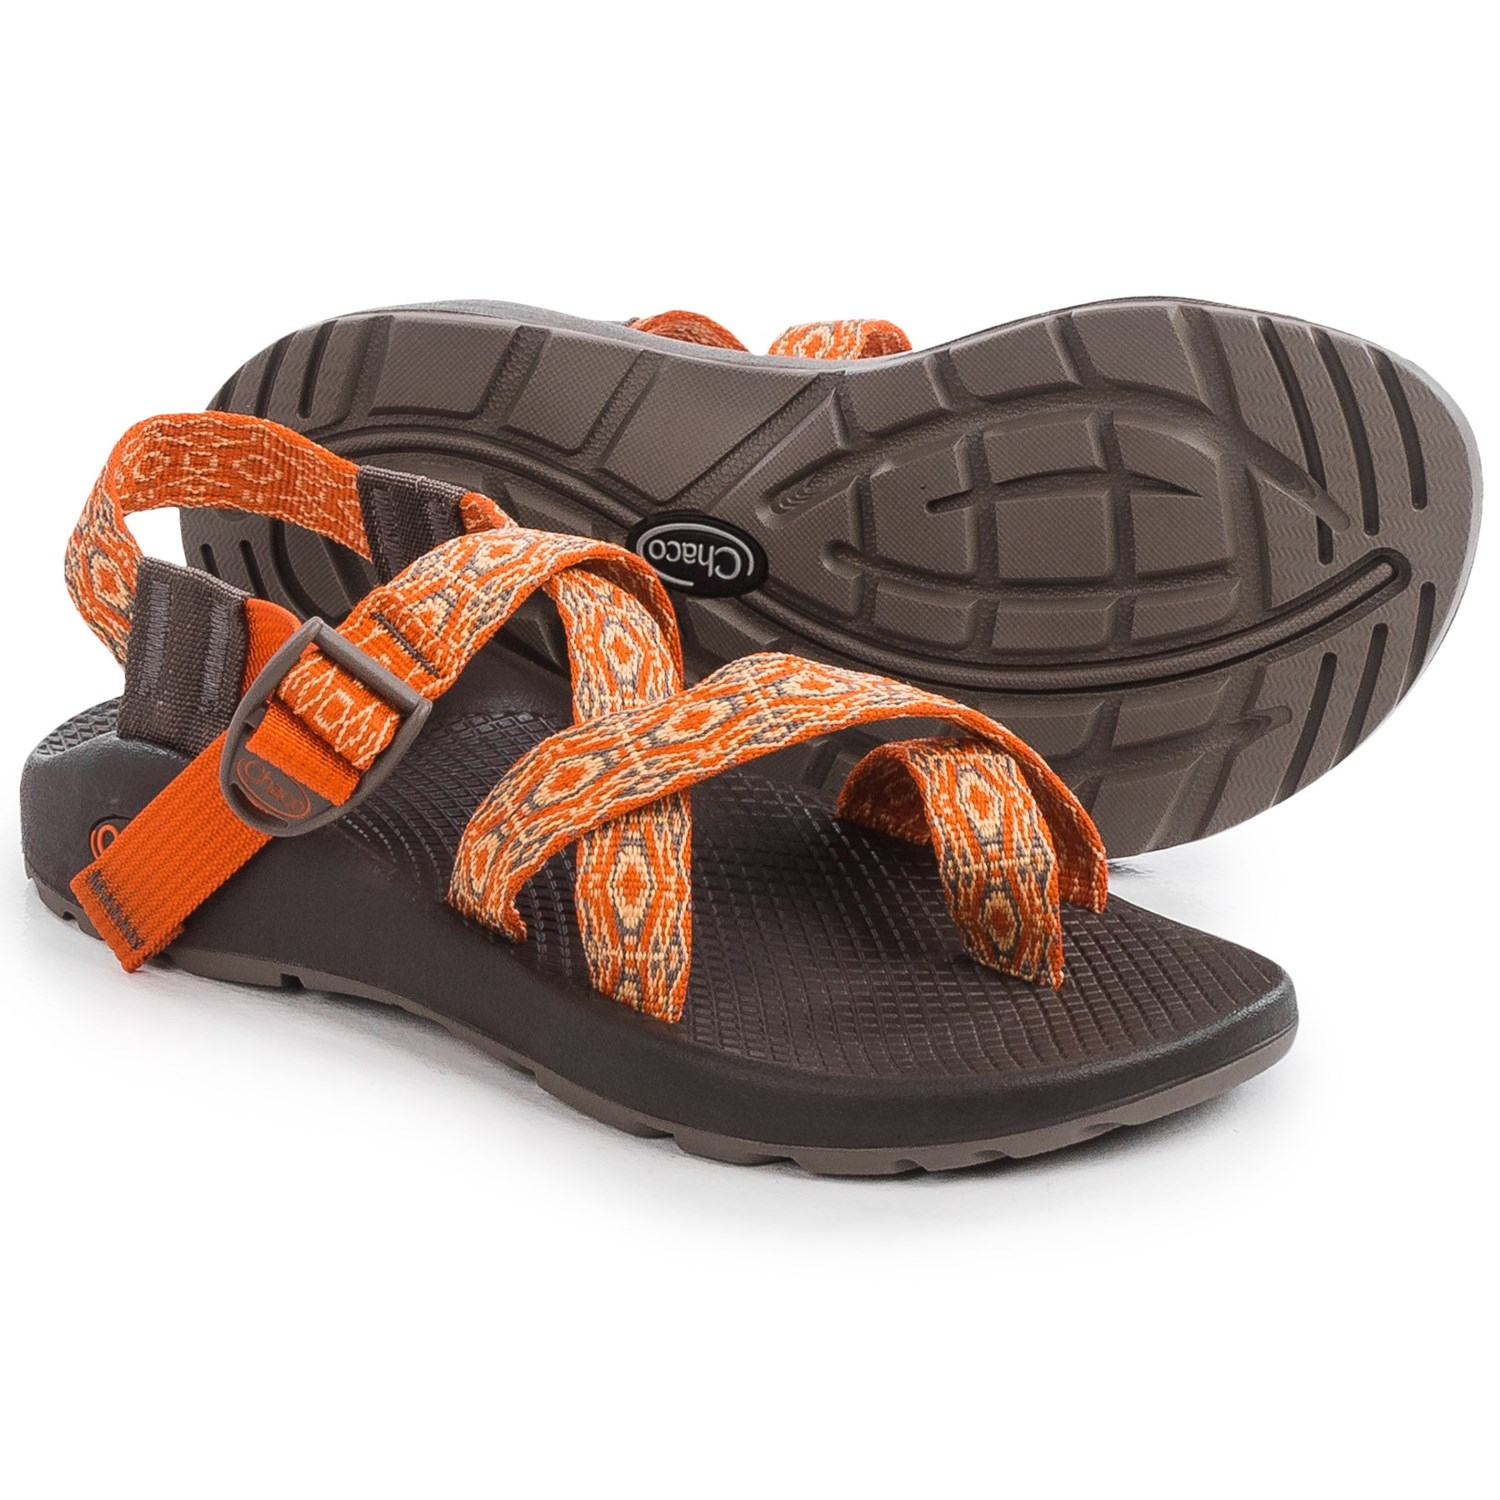 Chaco Z/2® Classic Sport Sandals (For Women) 161PV - Save 42%